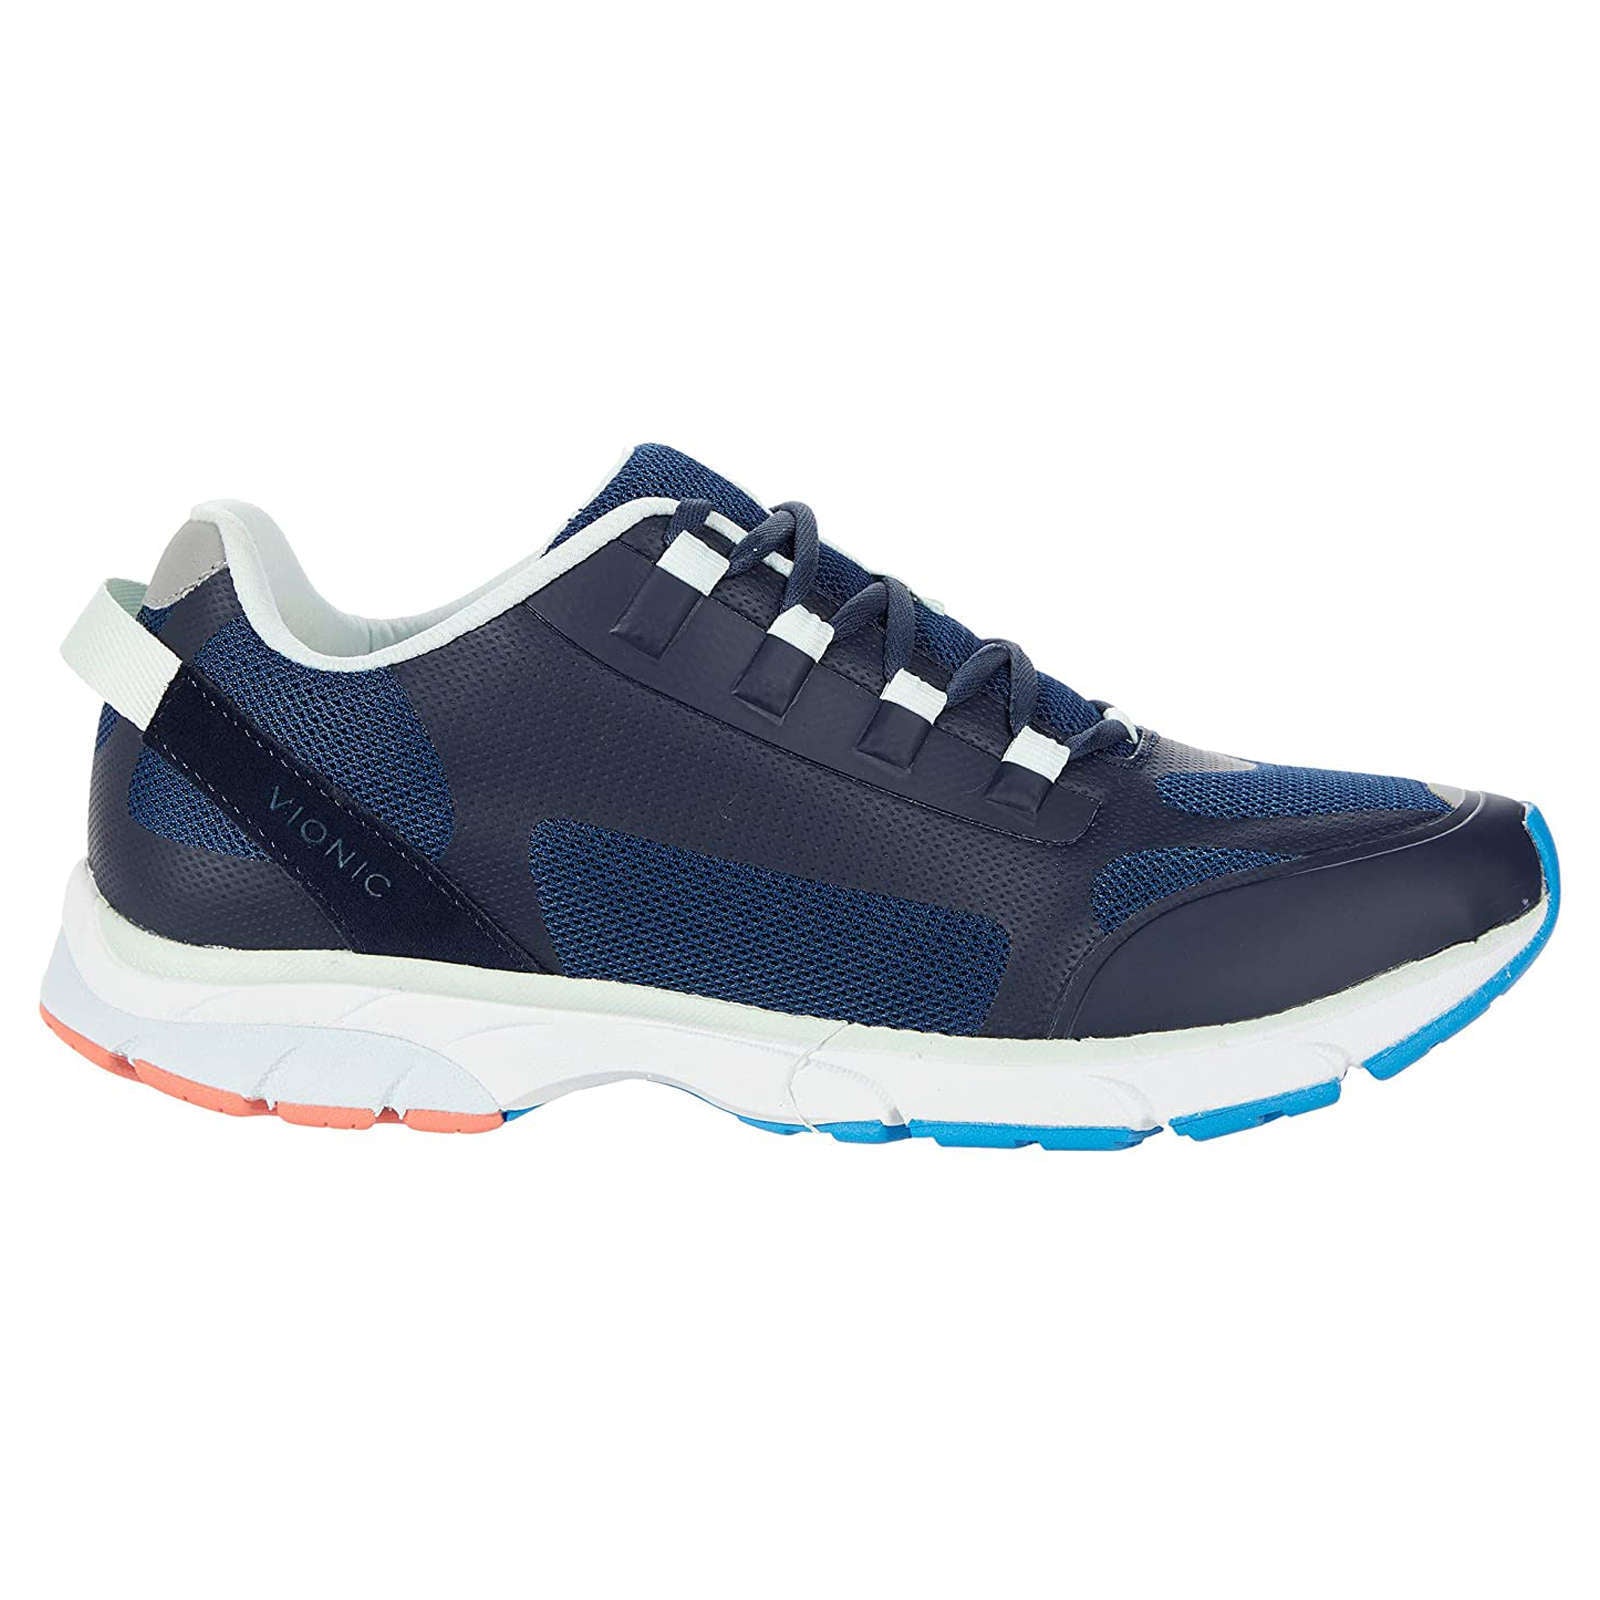 Vionic Edin Synthetic Textile Womens Trainers#color_dark blue